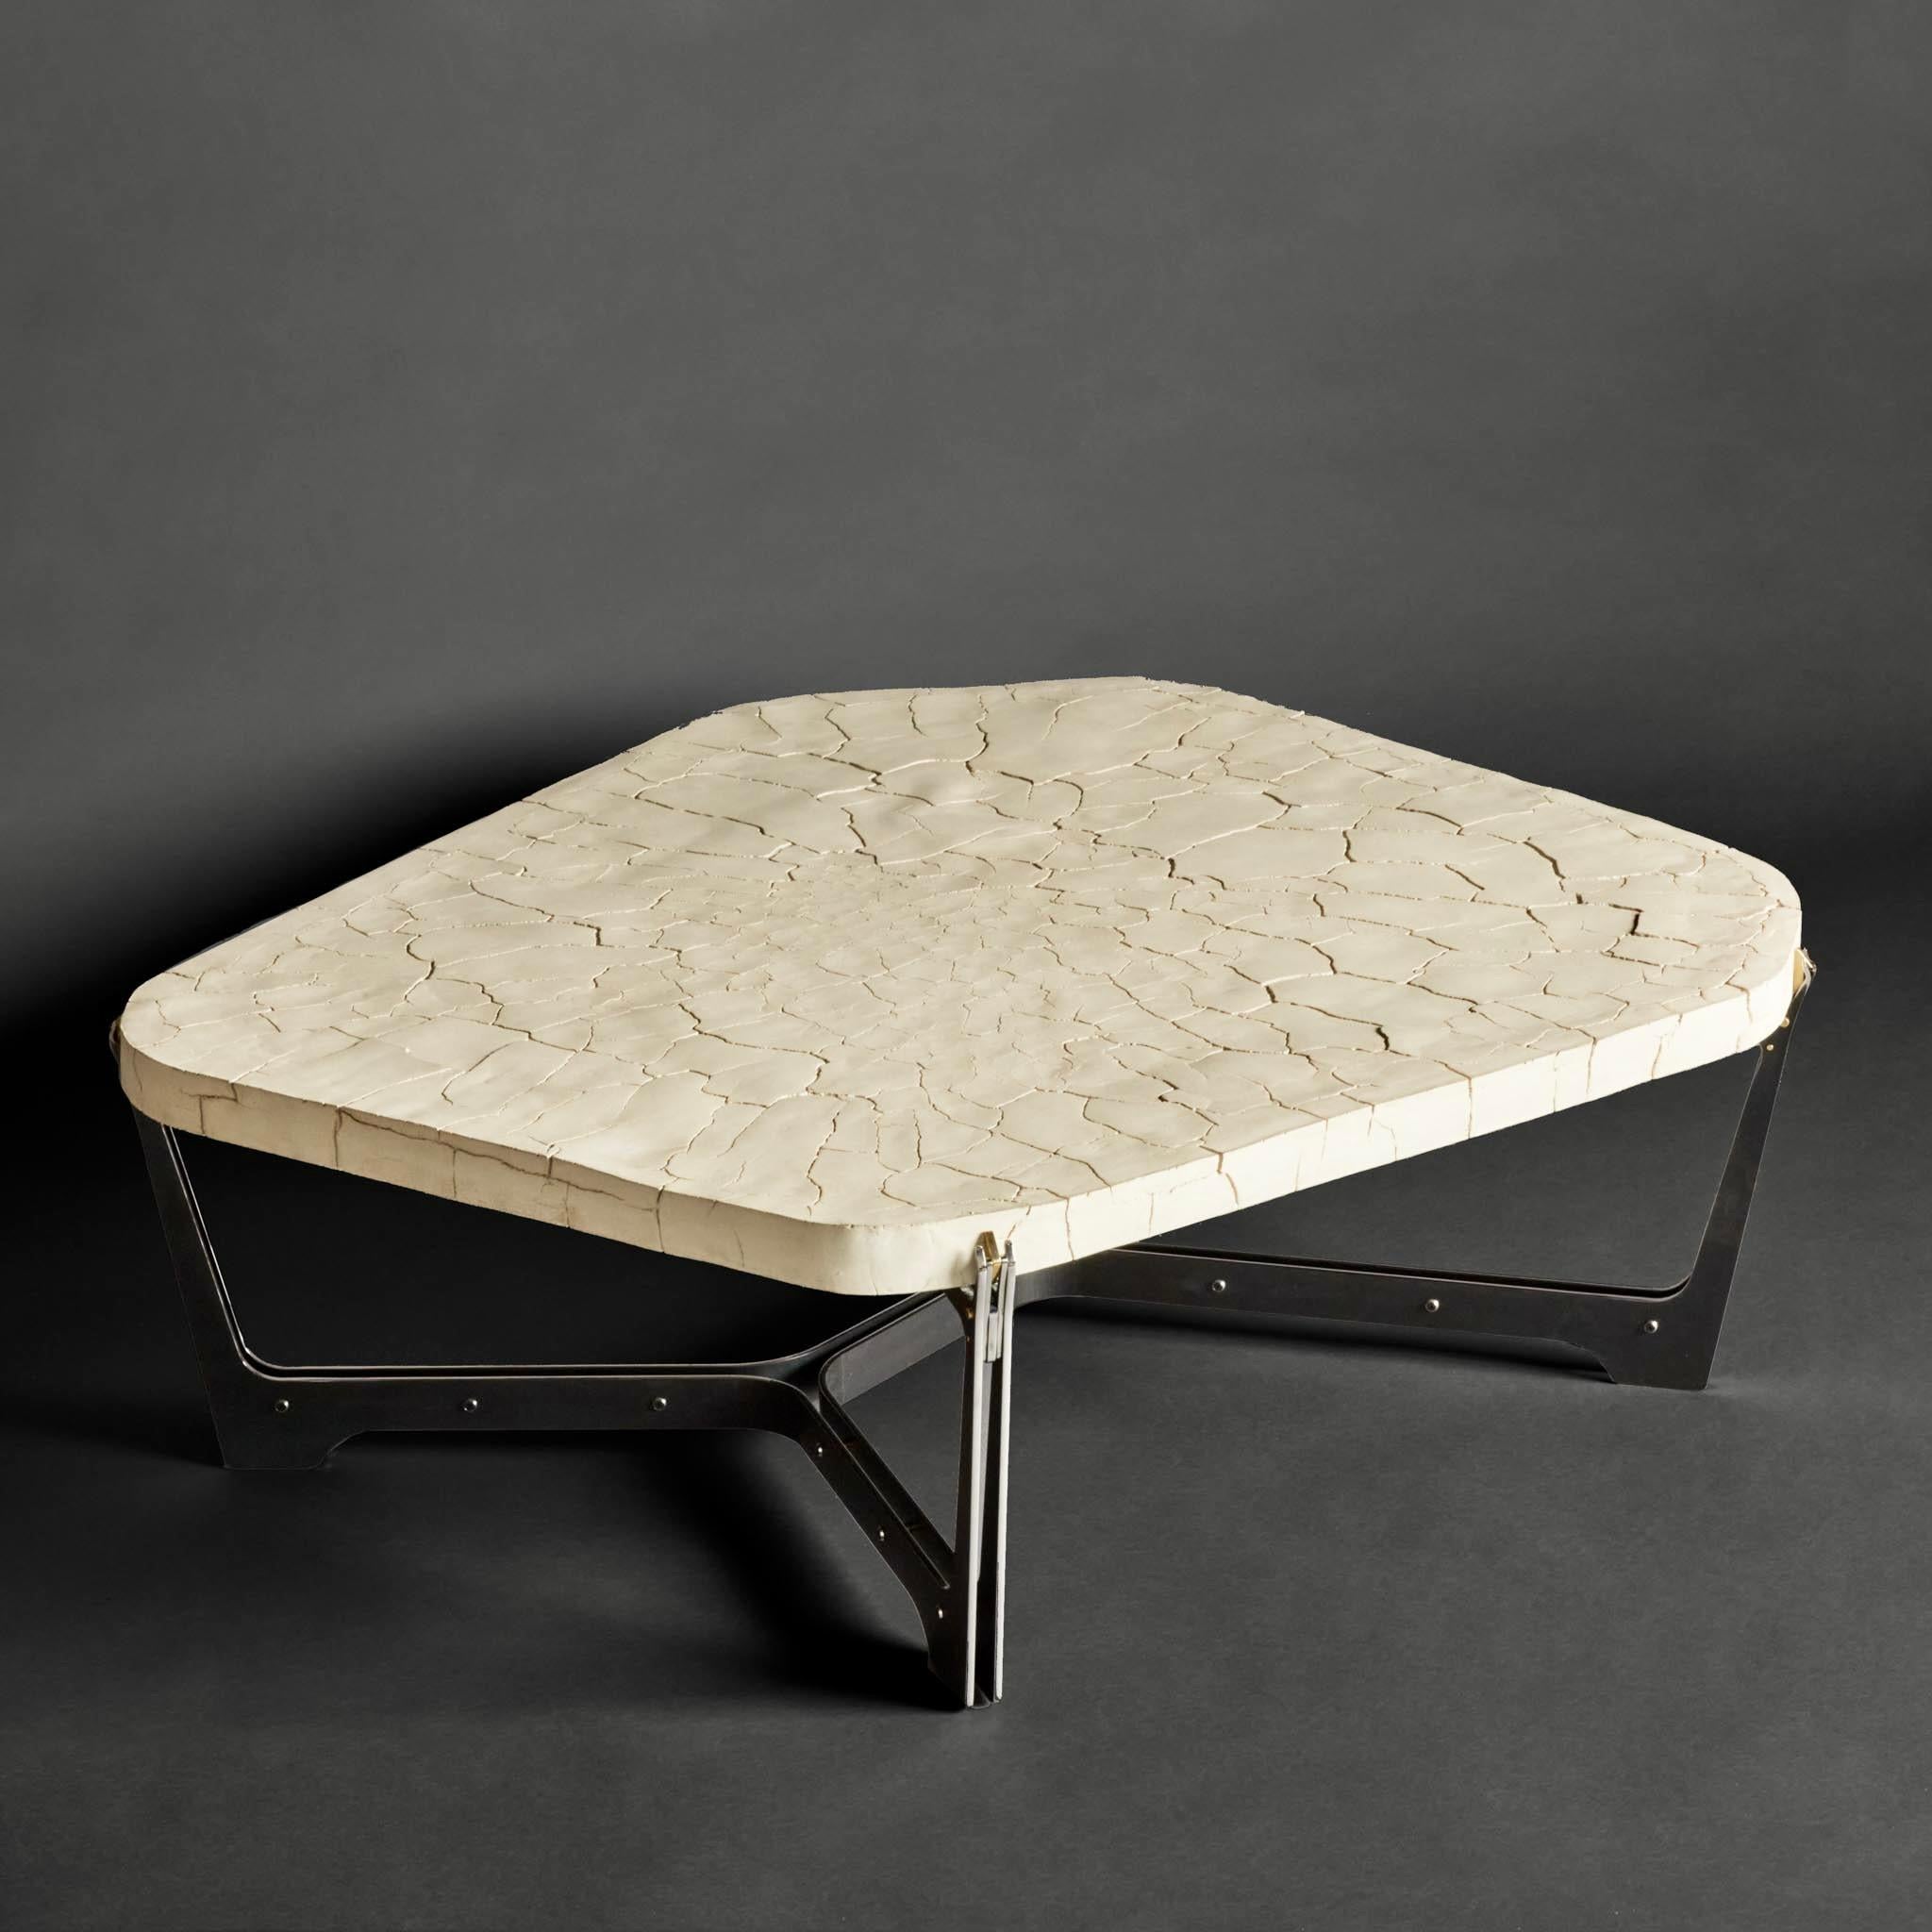 This pentagonal white concrete with black steel & brass details coffee table by Atelier Erwan Boulloud is a Tribute to Alberto Burri Italian Abstract Artist (Città di Castello, Italy 12/03/1915 - 13/02/1995 Nice France).
Signed piece on the